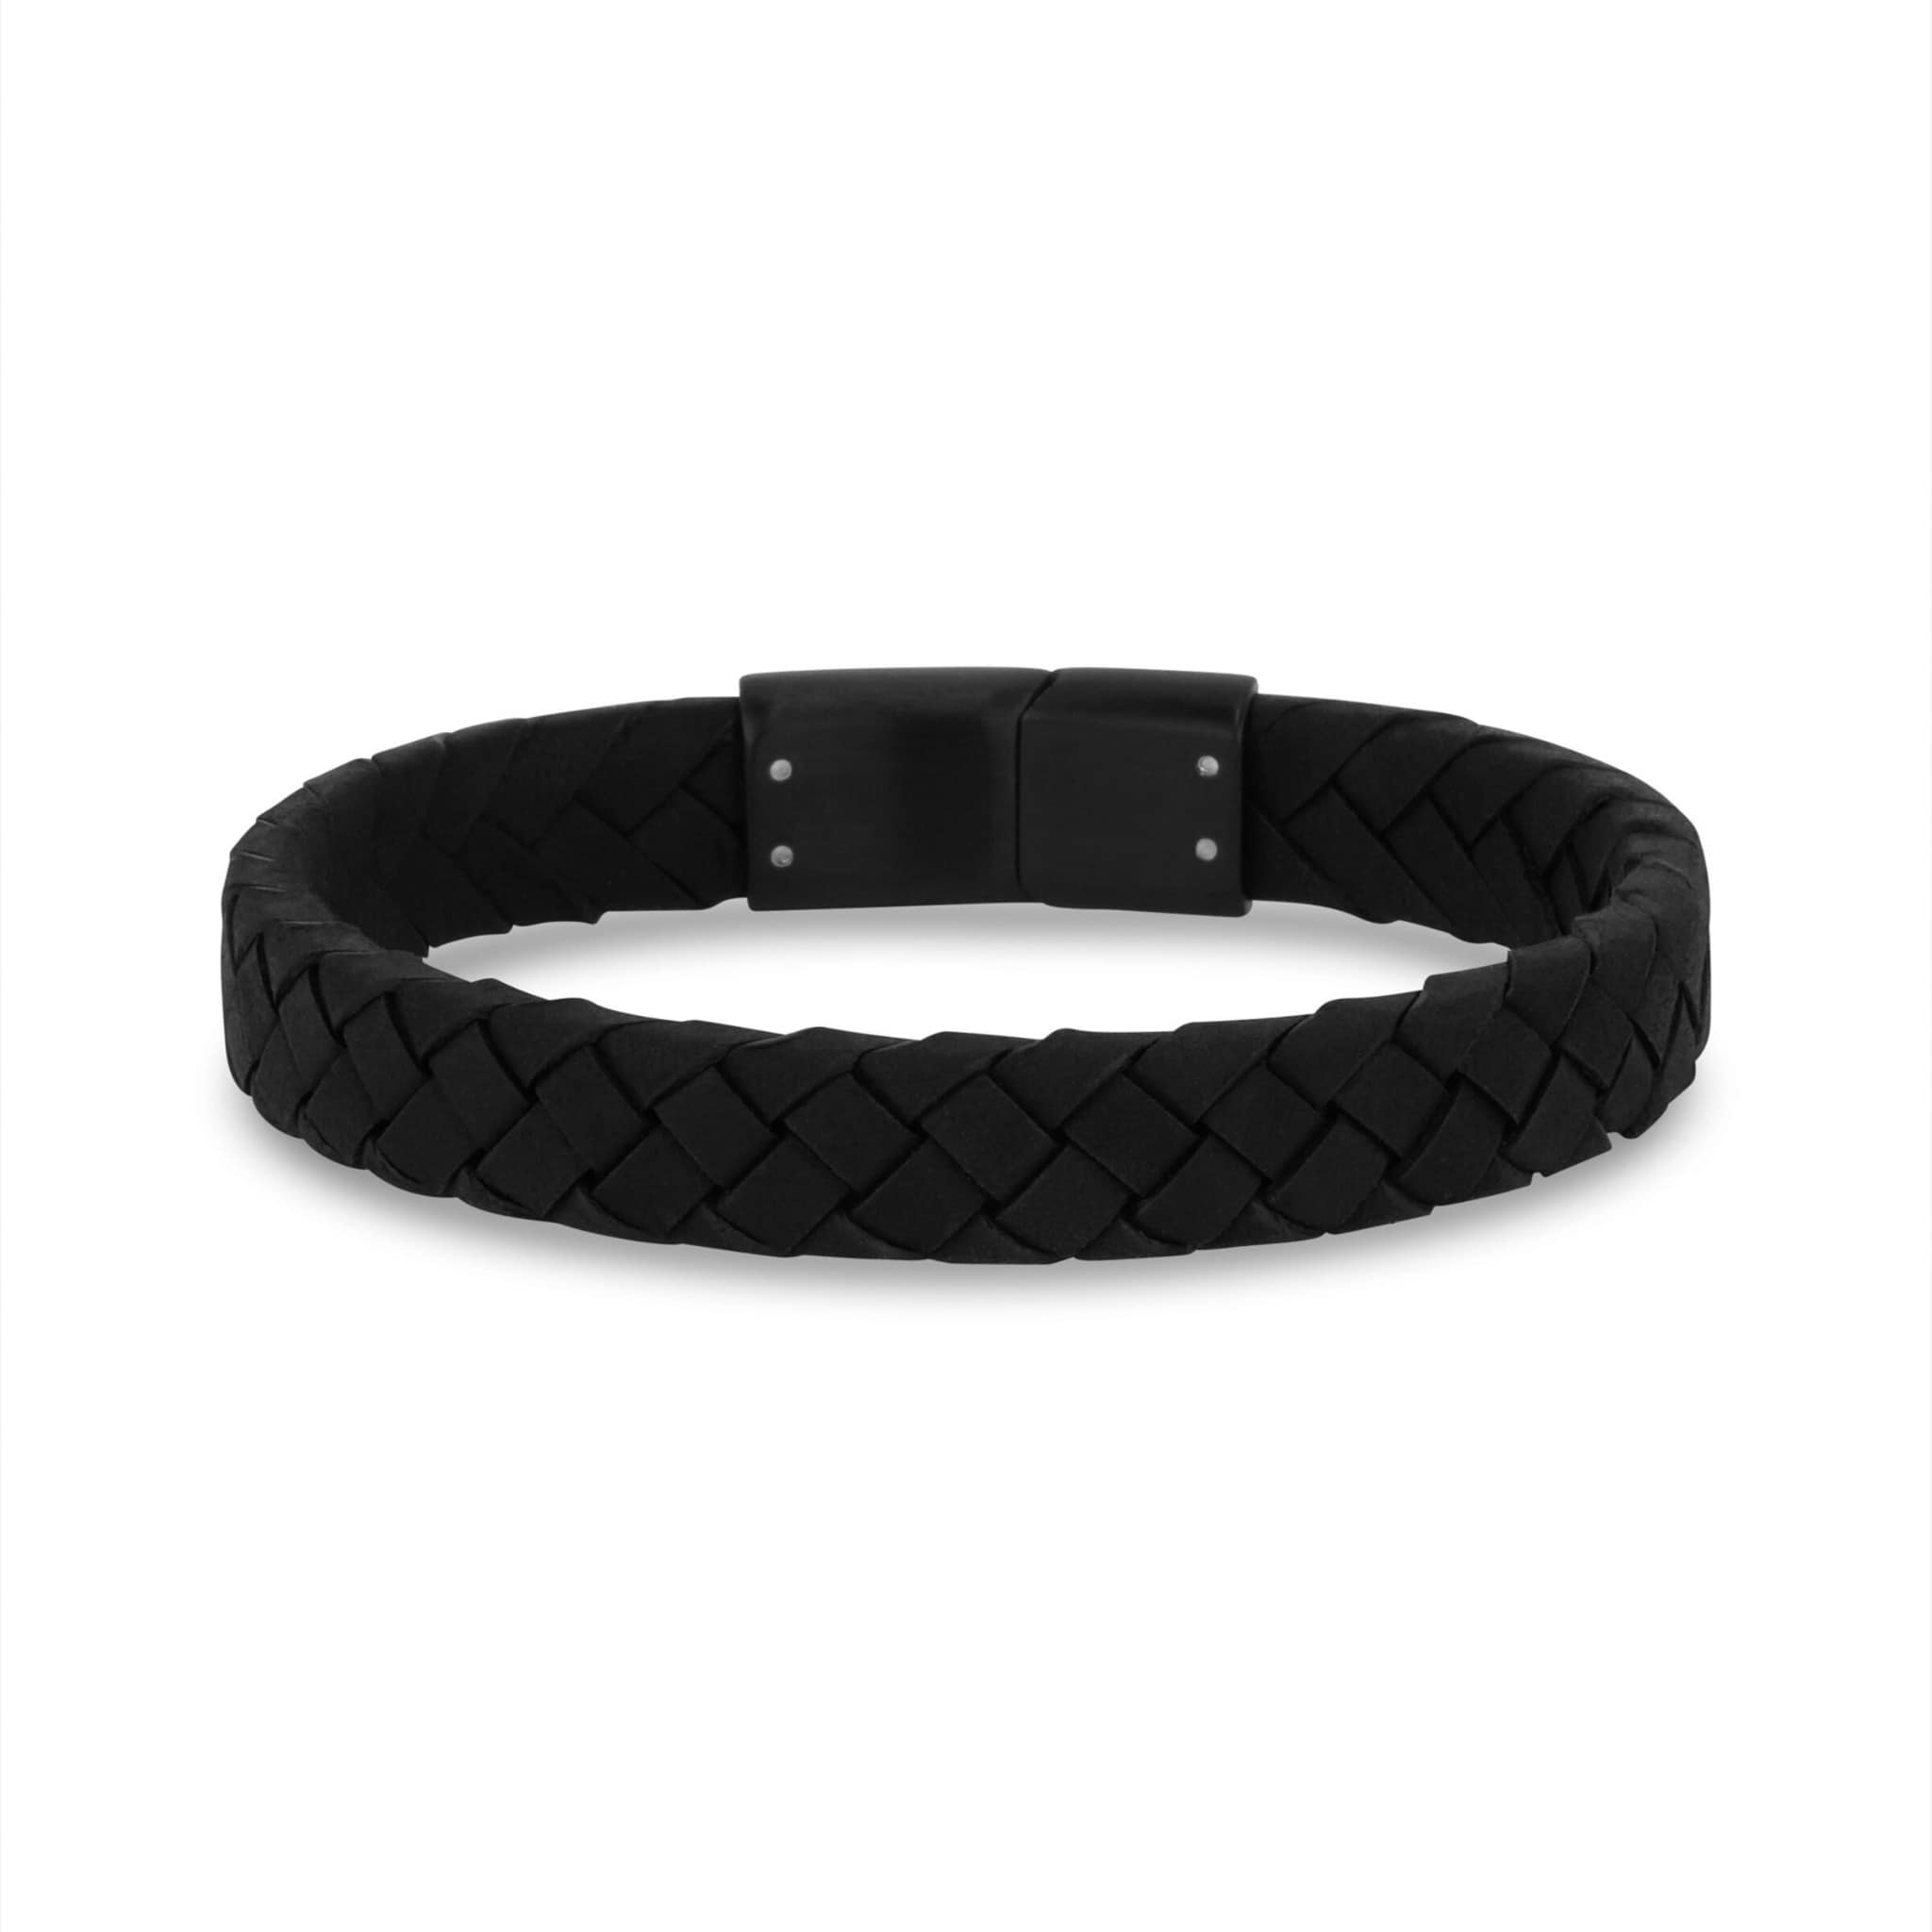 Armory Leather Bracelet with Sterling Silver, 6.6mm | David Yurman